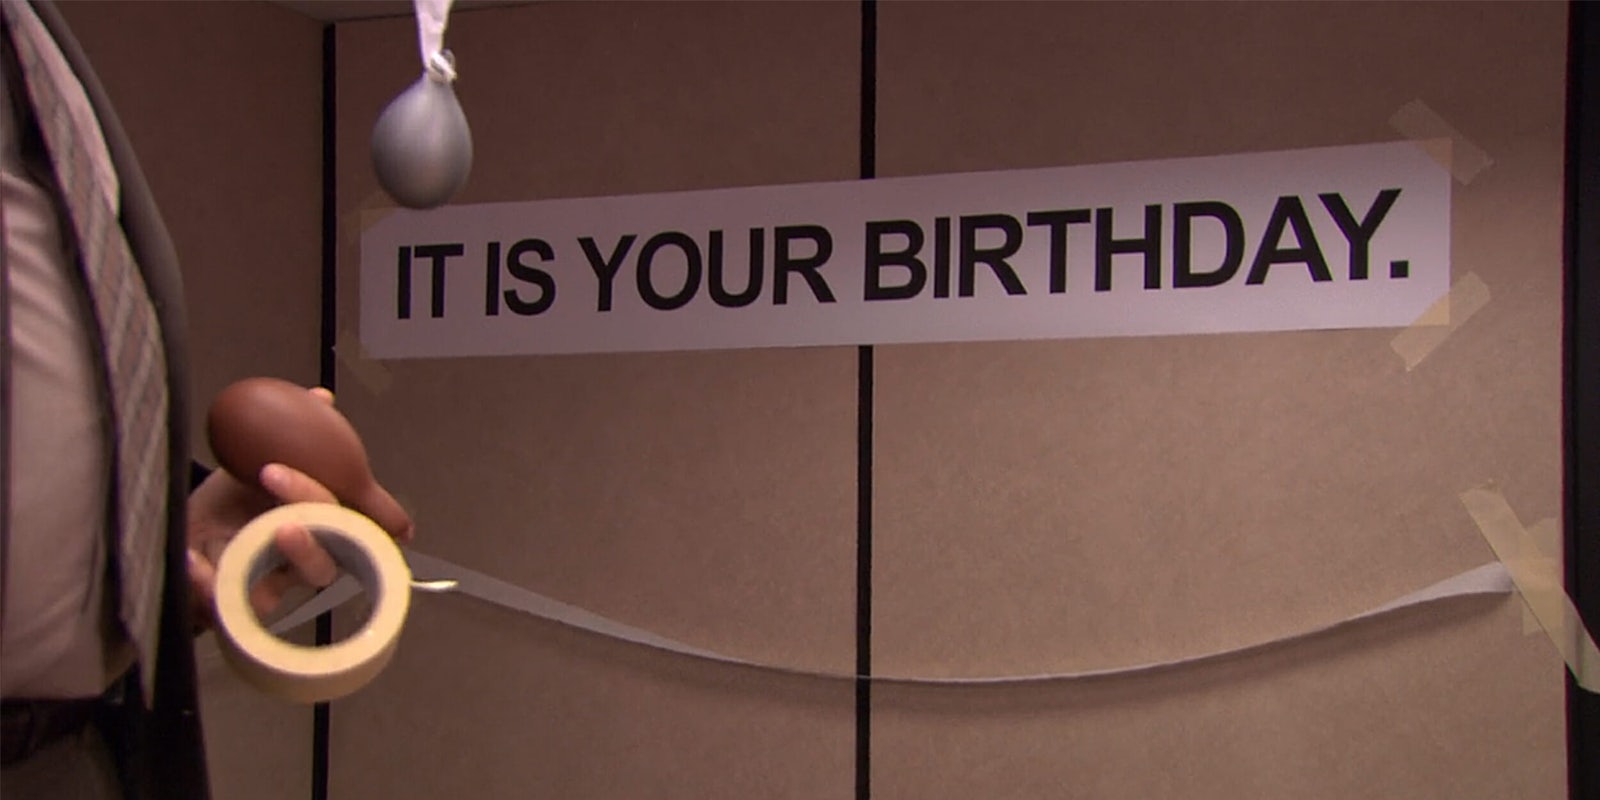 Dwight from 'The Office' puts up 'It is your birthday.' sign in break room